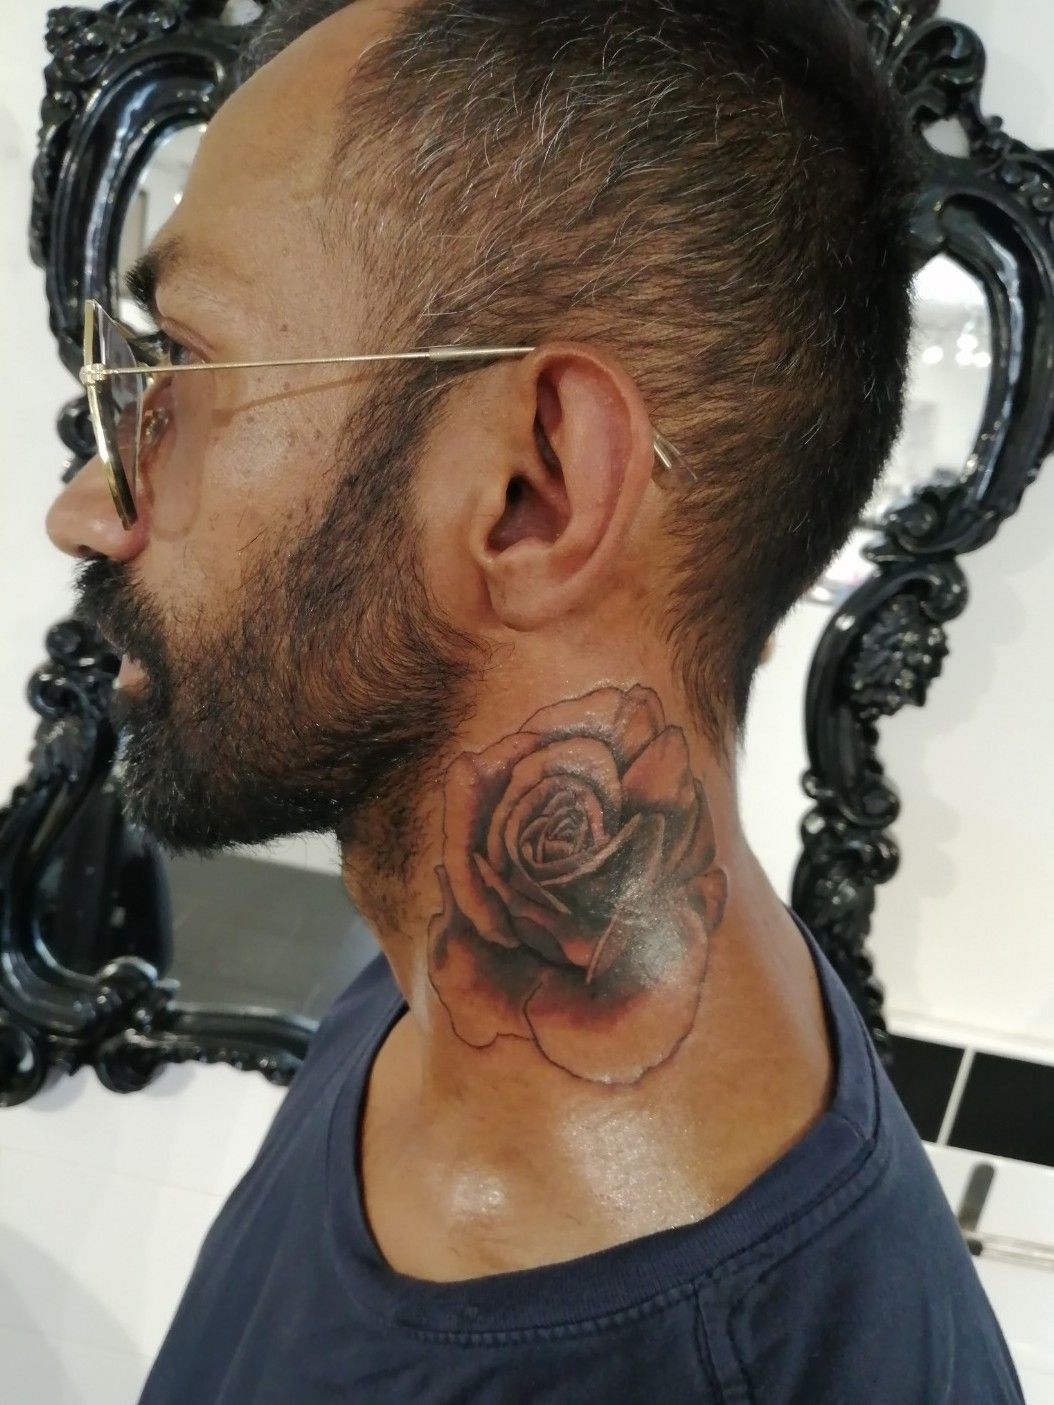 Share 86 about neck tattoo cover up super cool  indaotaonec